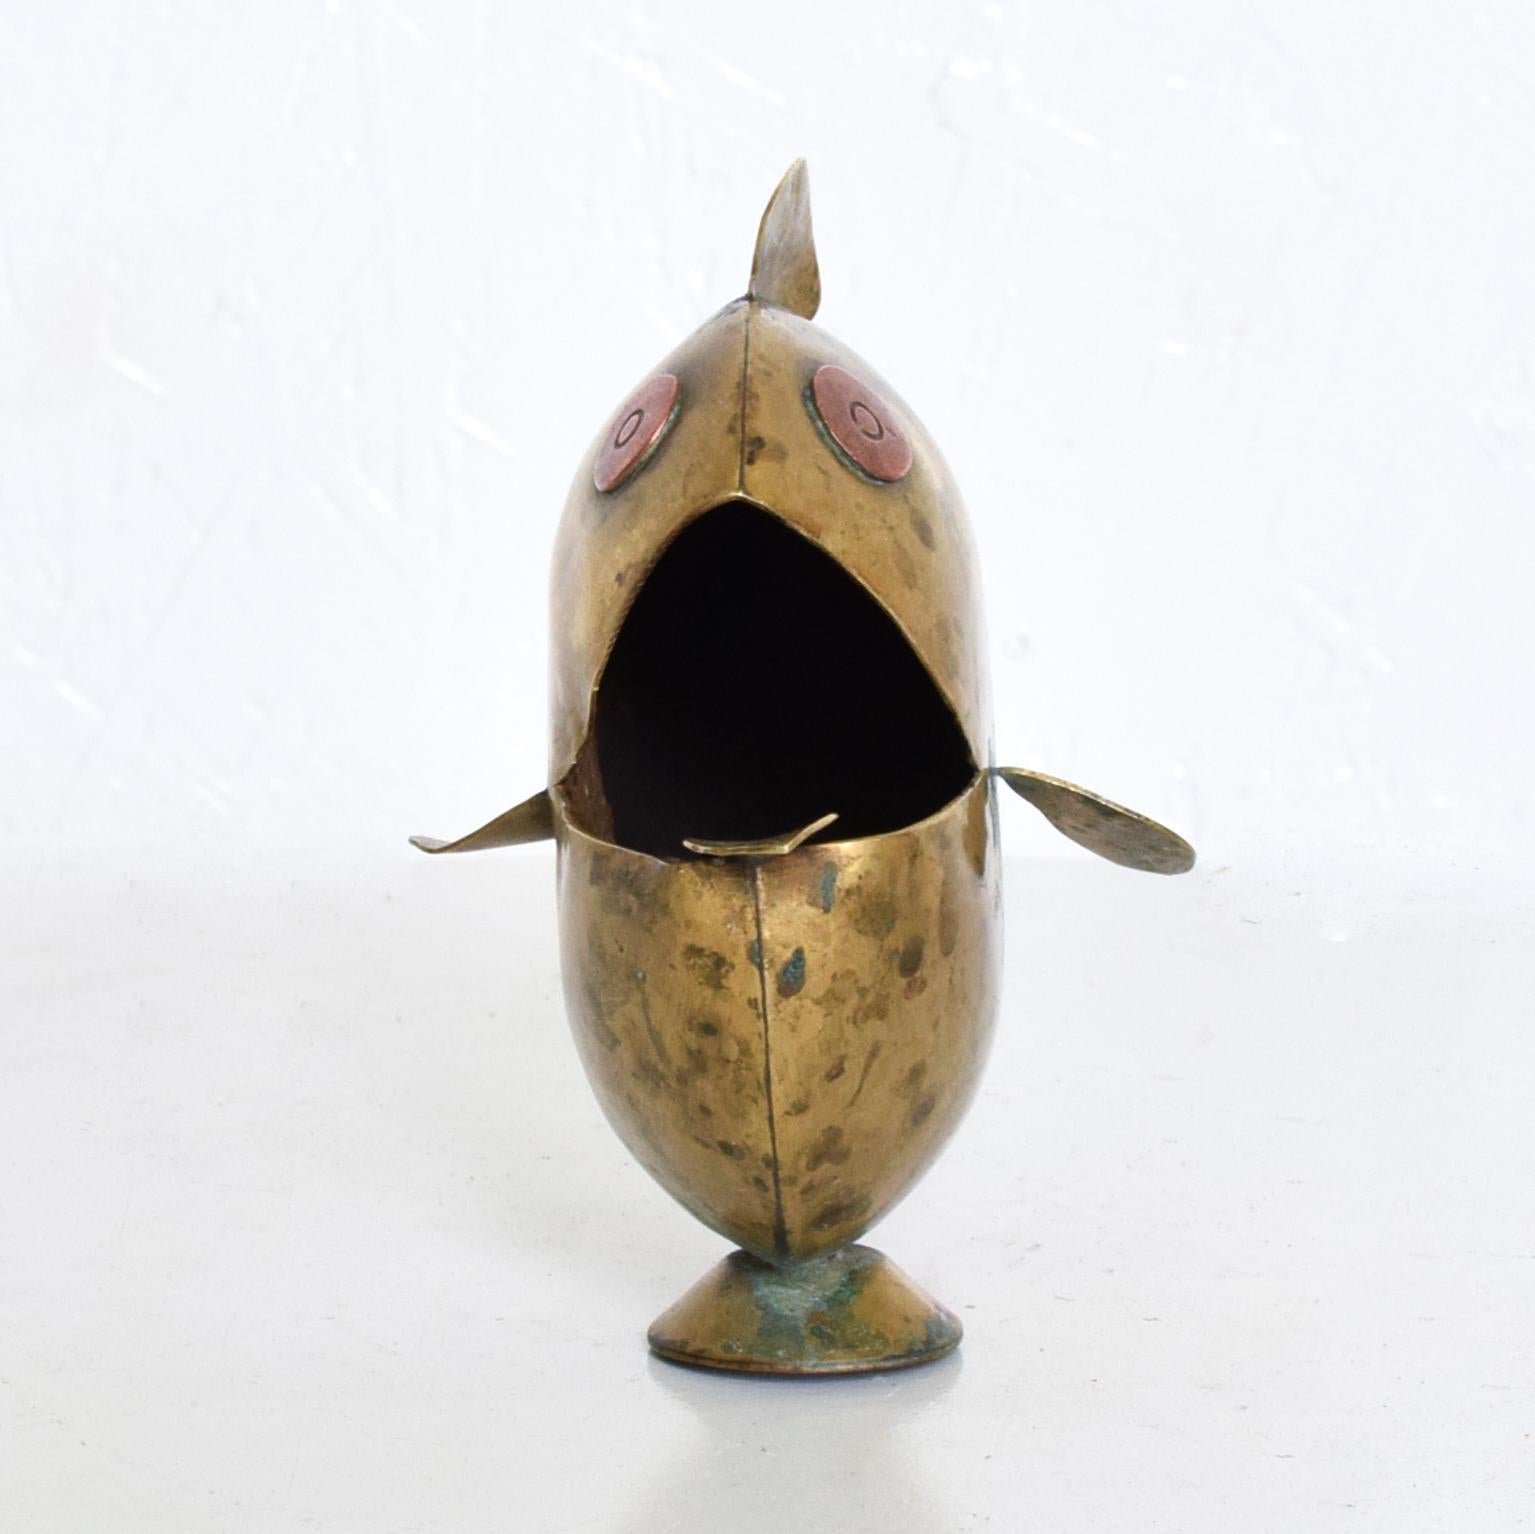 For your consideration, a vintage decorative ashtray in the shape of a fish. Made of solid brass with copper eyes. Unmarked. Made in Mexico circa the 1970s. Dimensions: 4 3/4